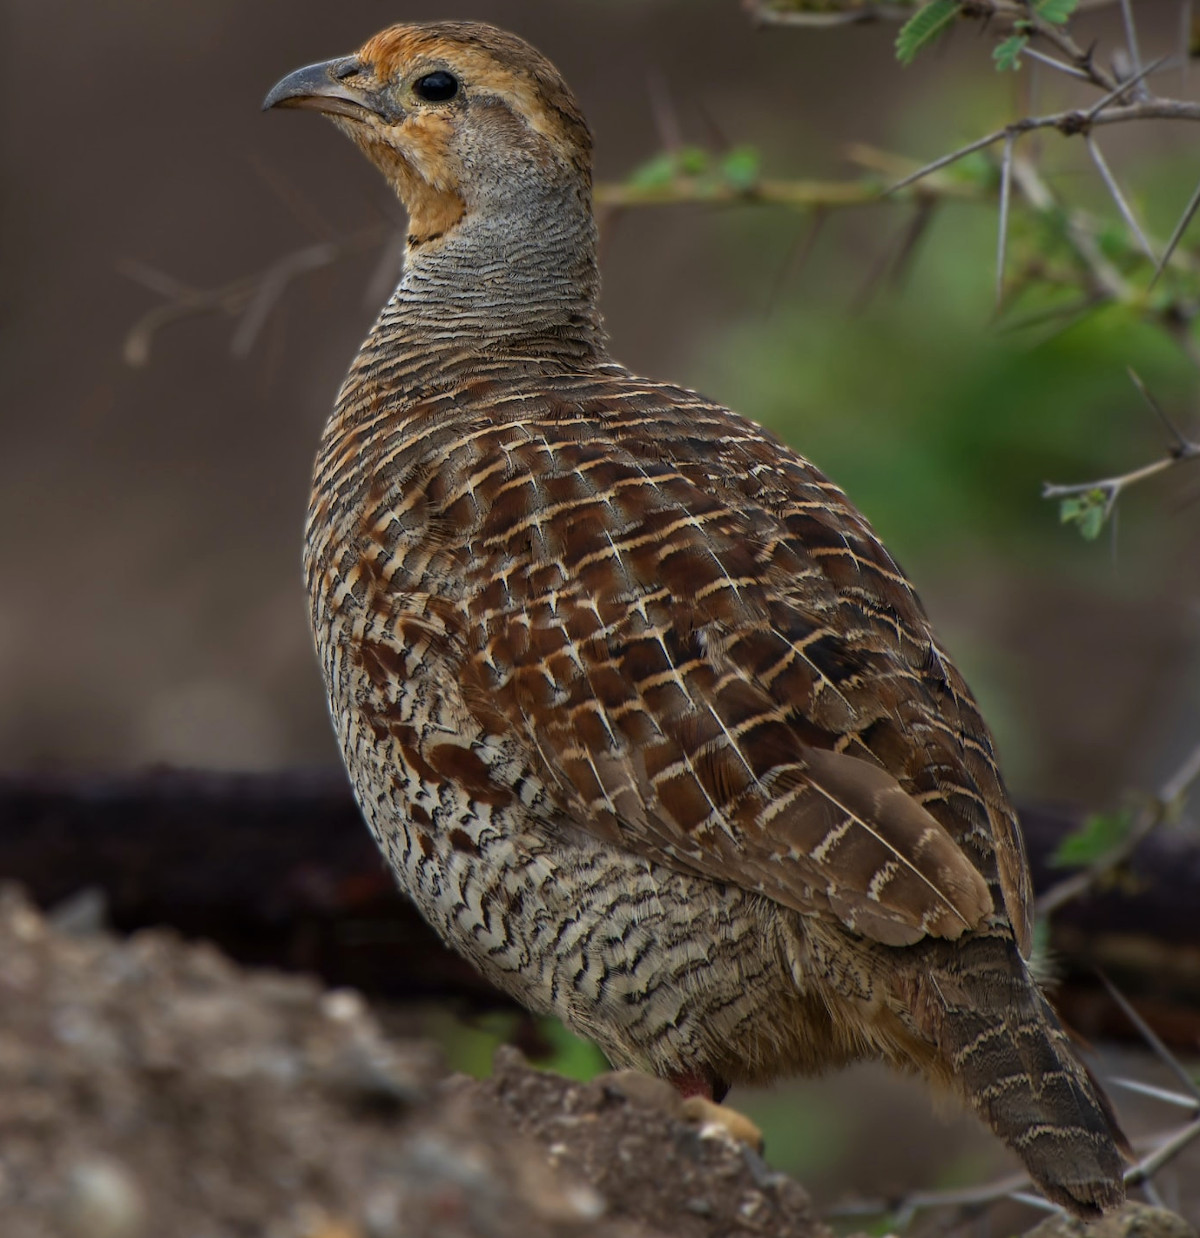 The different breeds of quail are all subtlety different